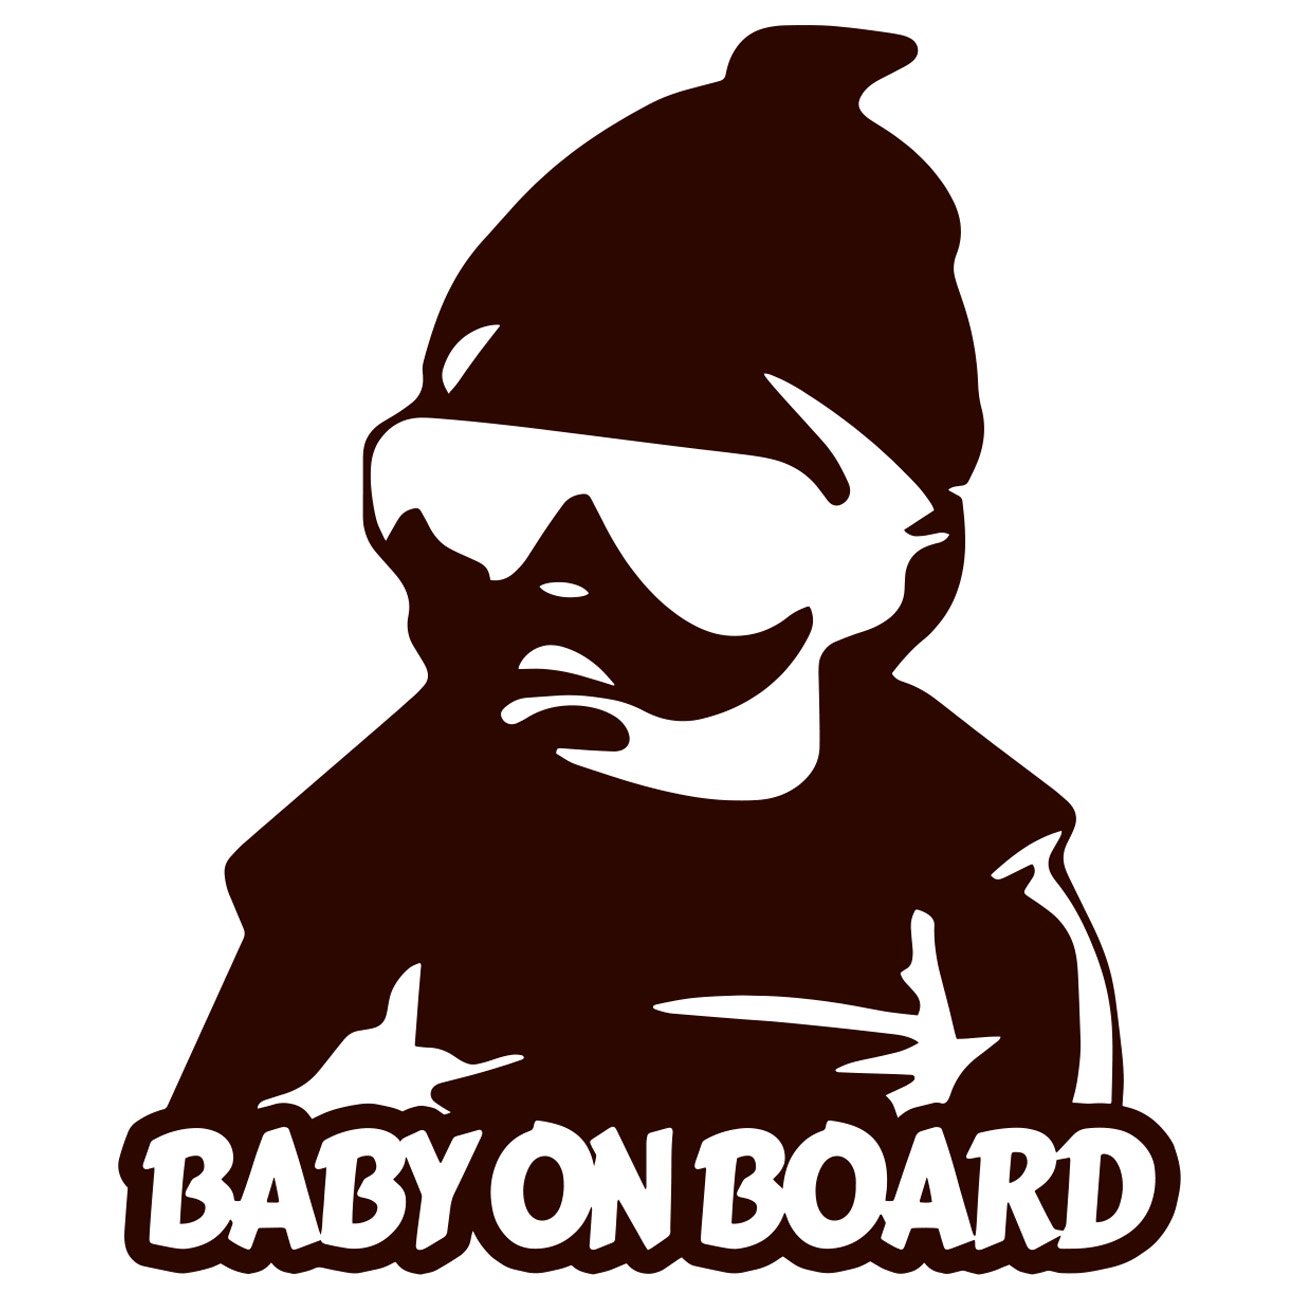 Baby on board3